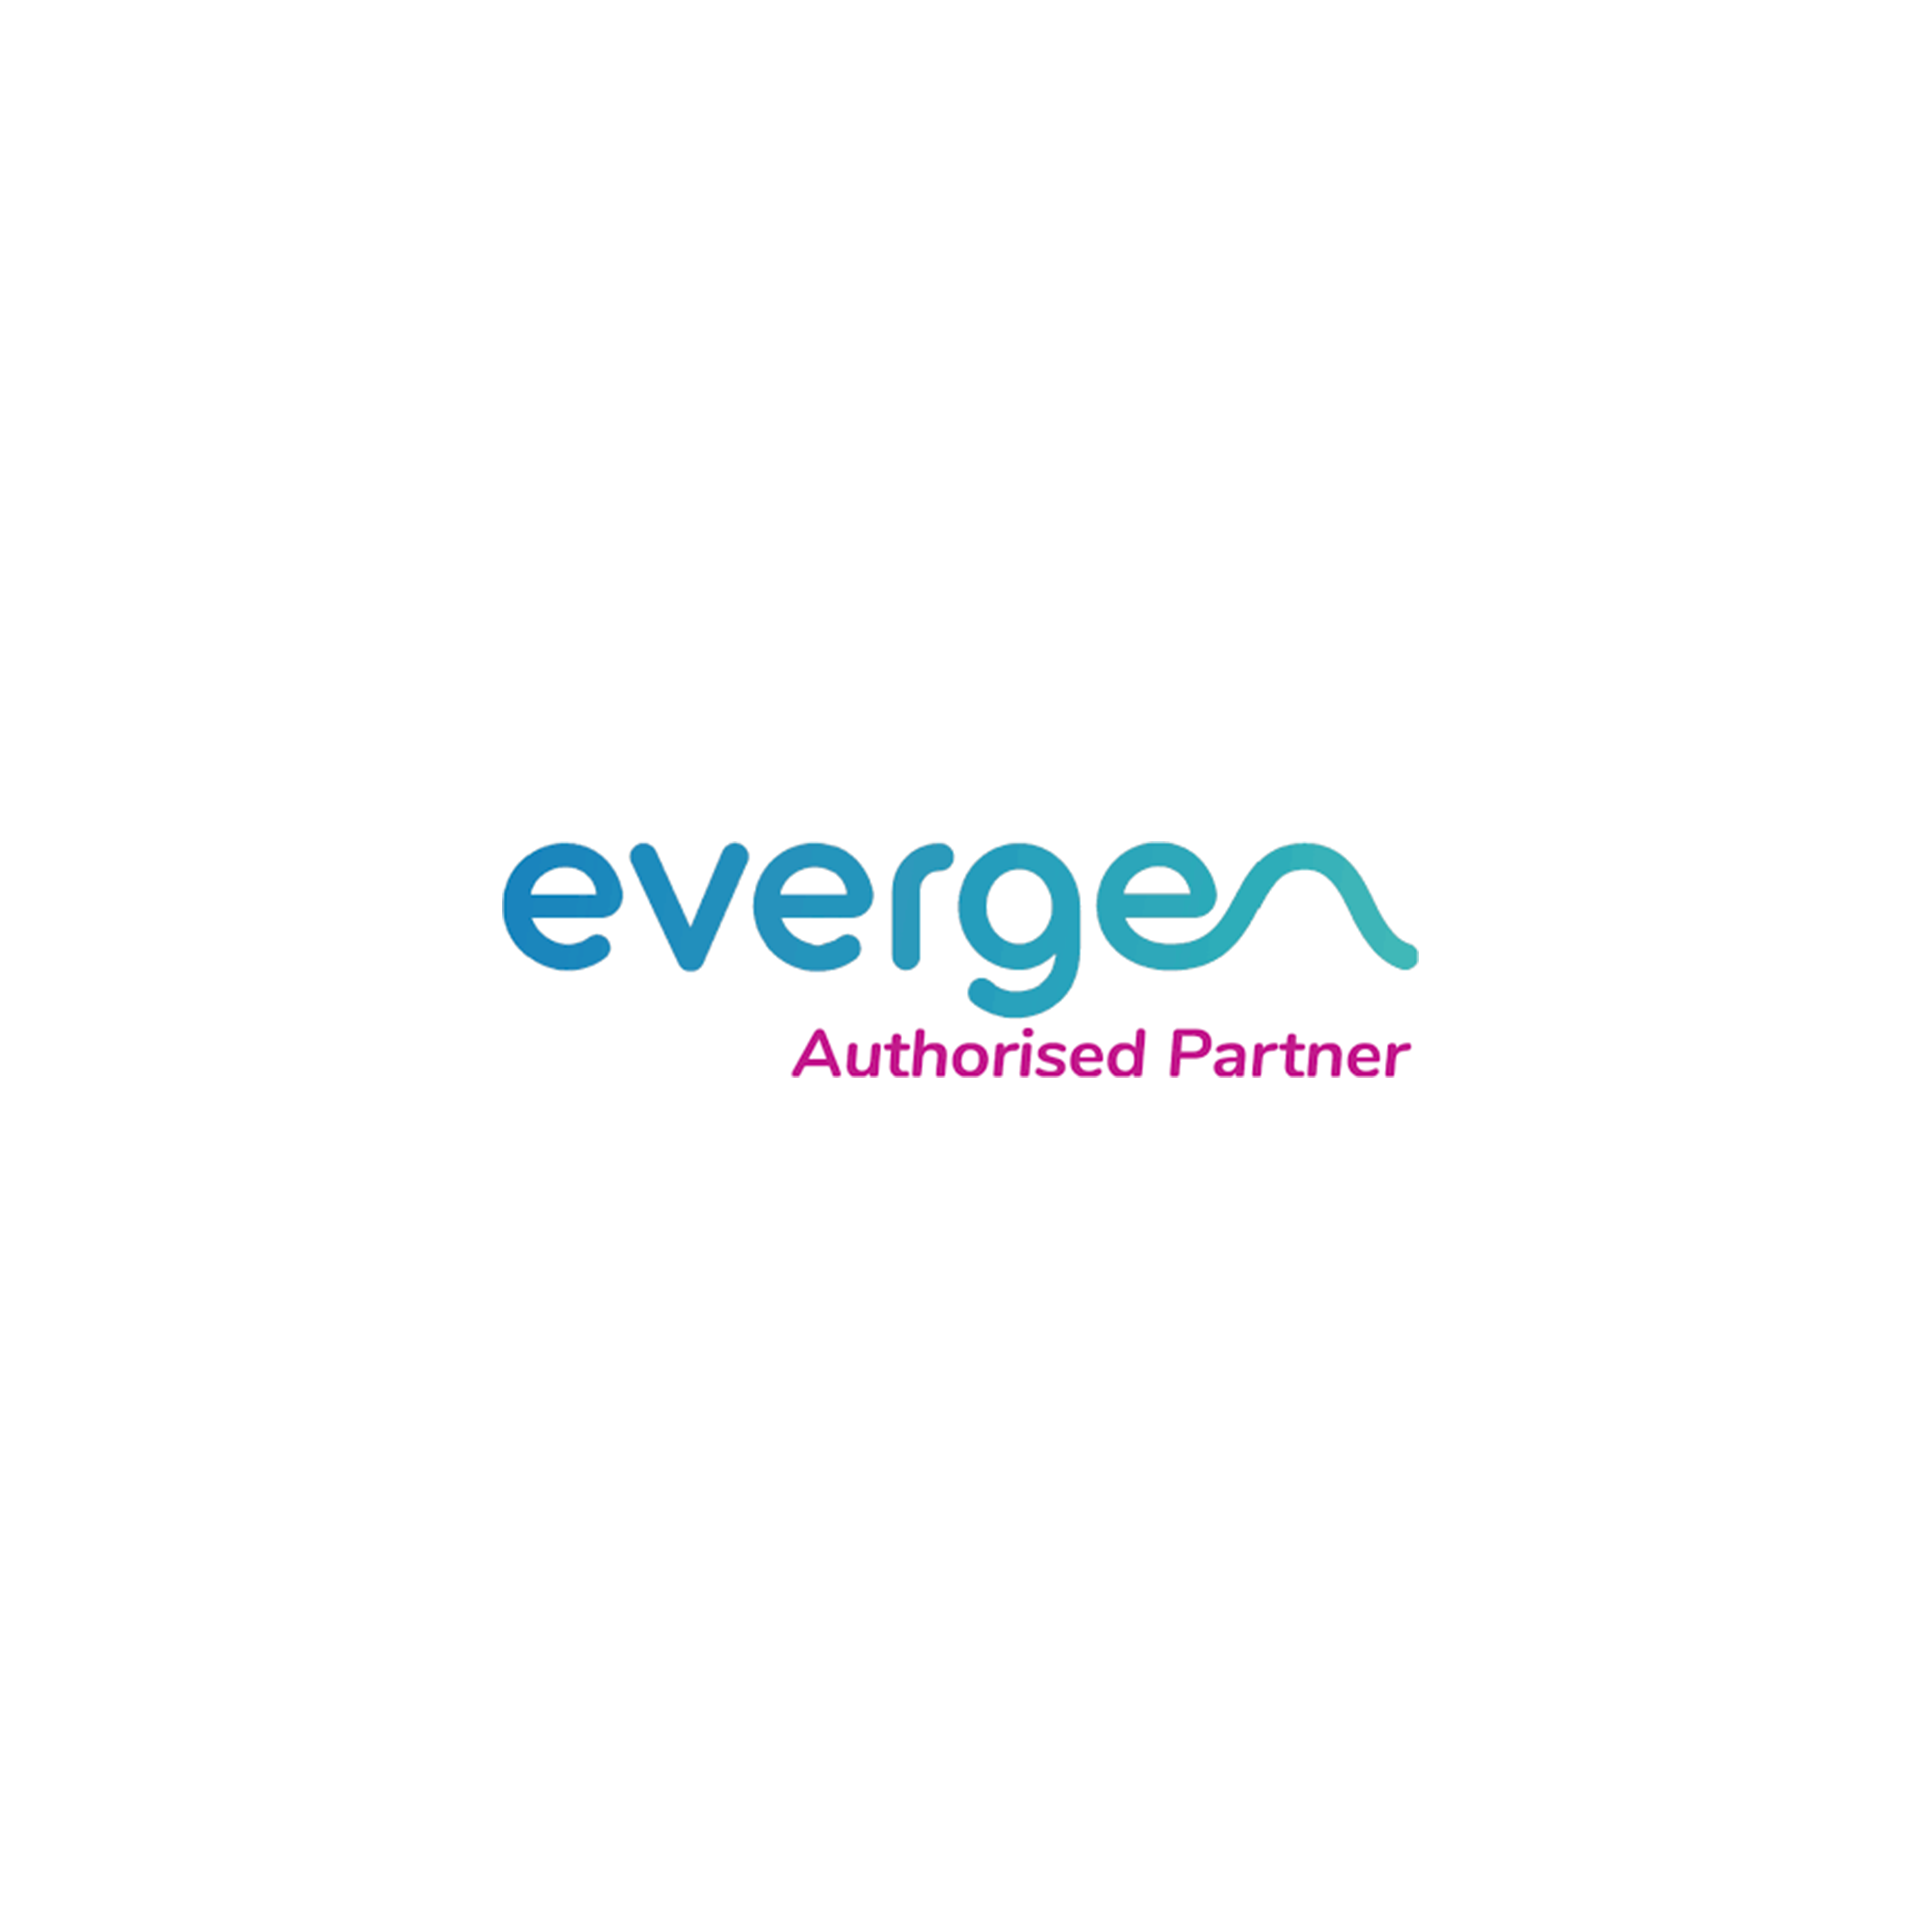 The evergreen logo is a blue and pink logo on a white background.